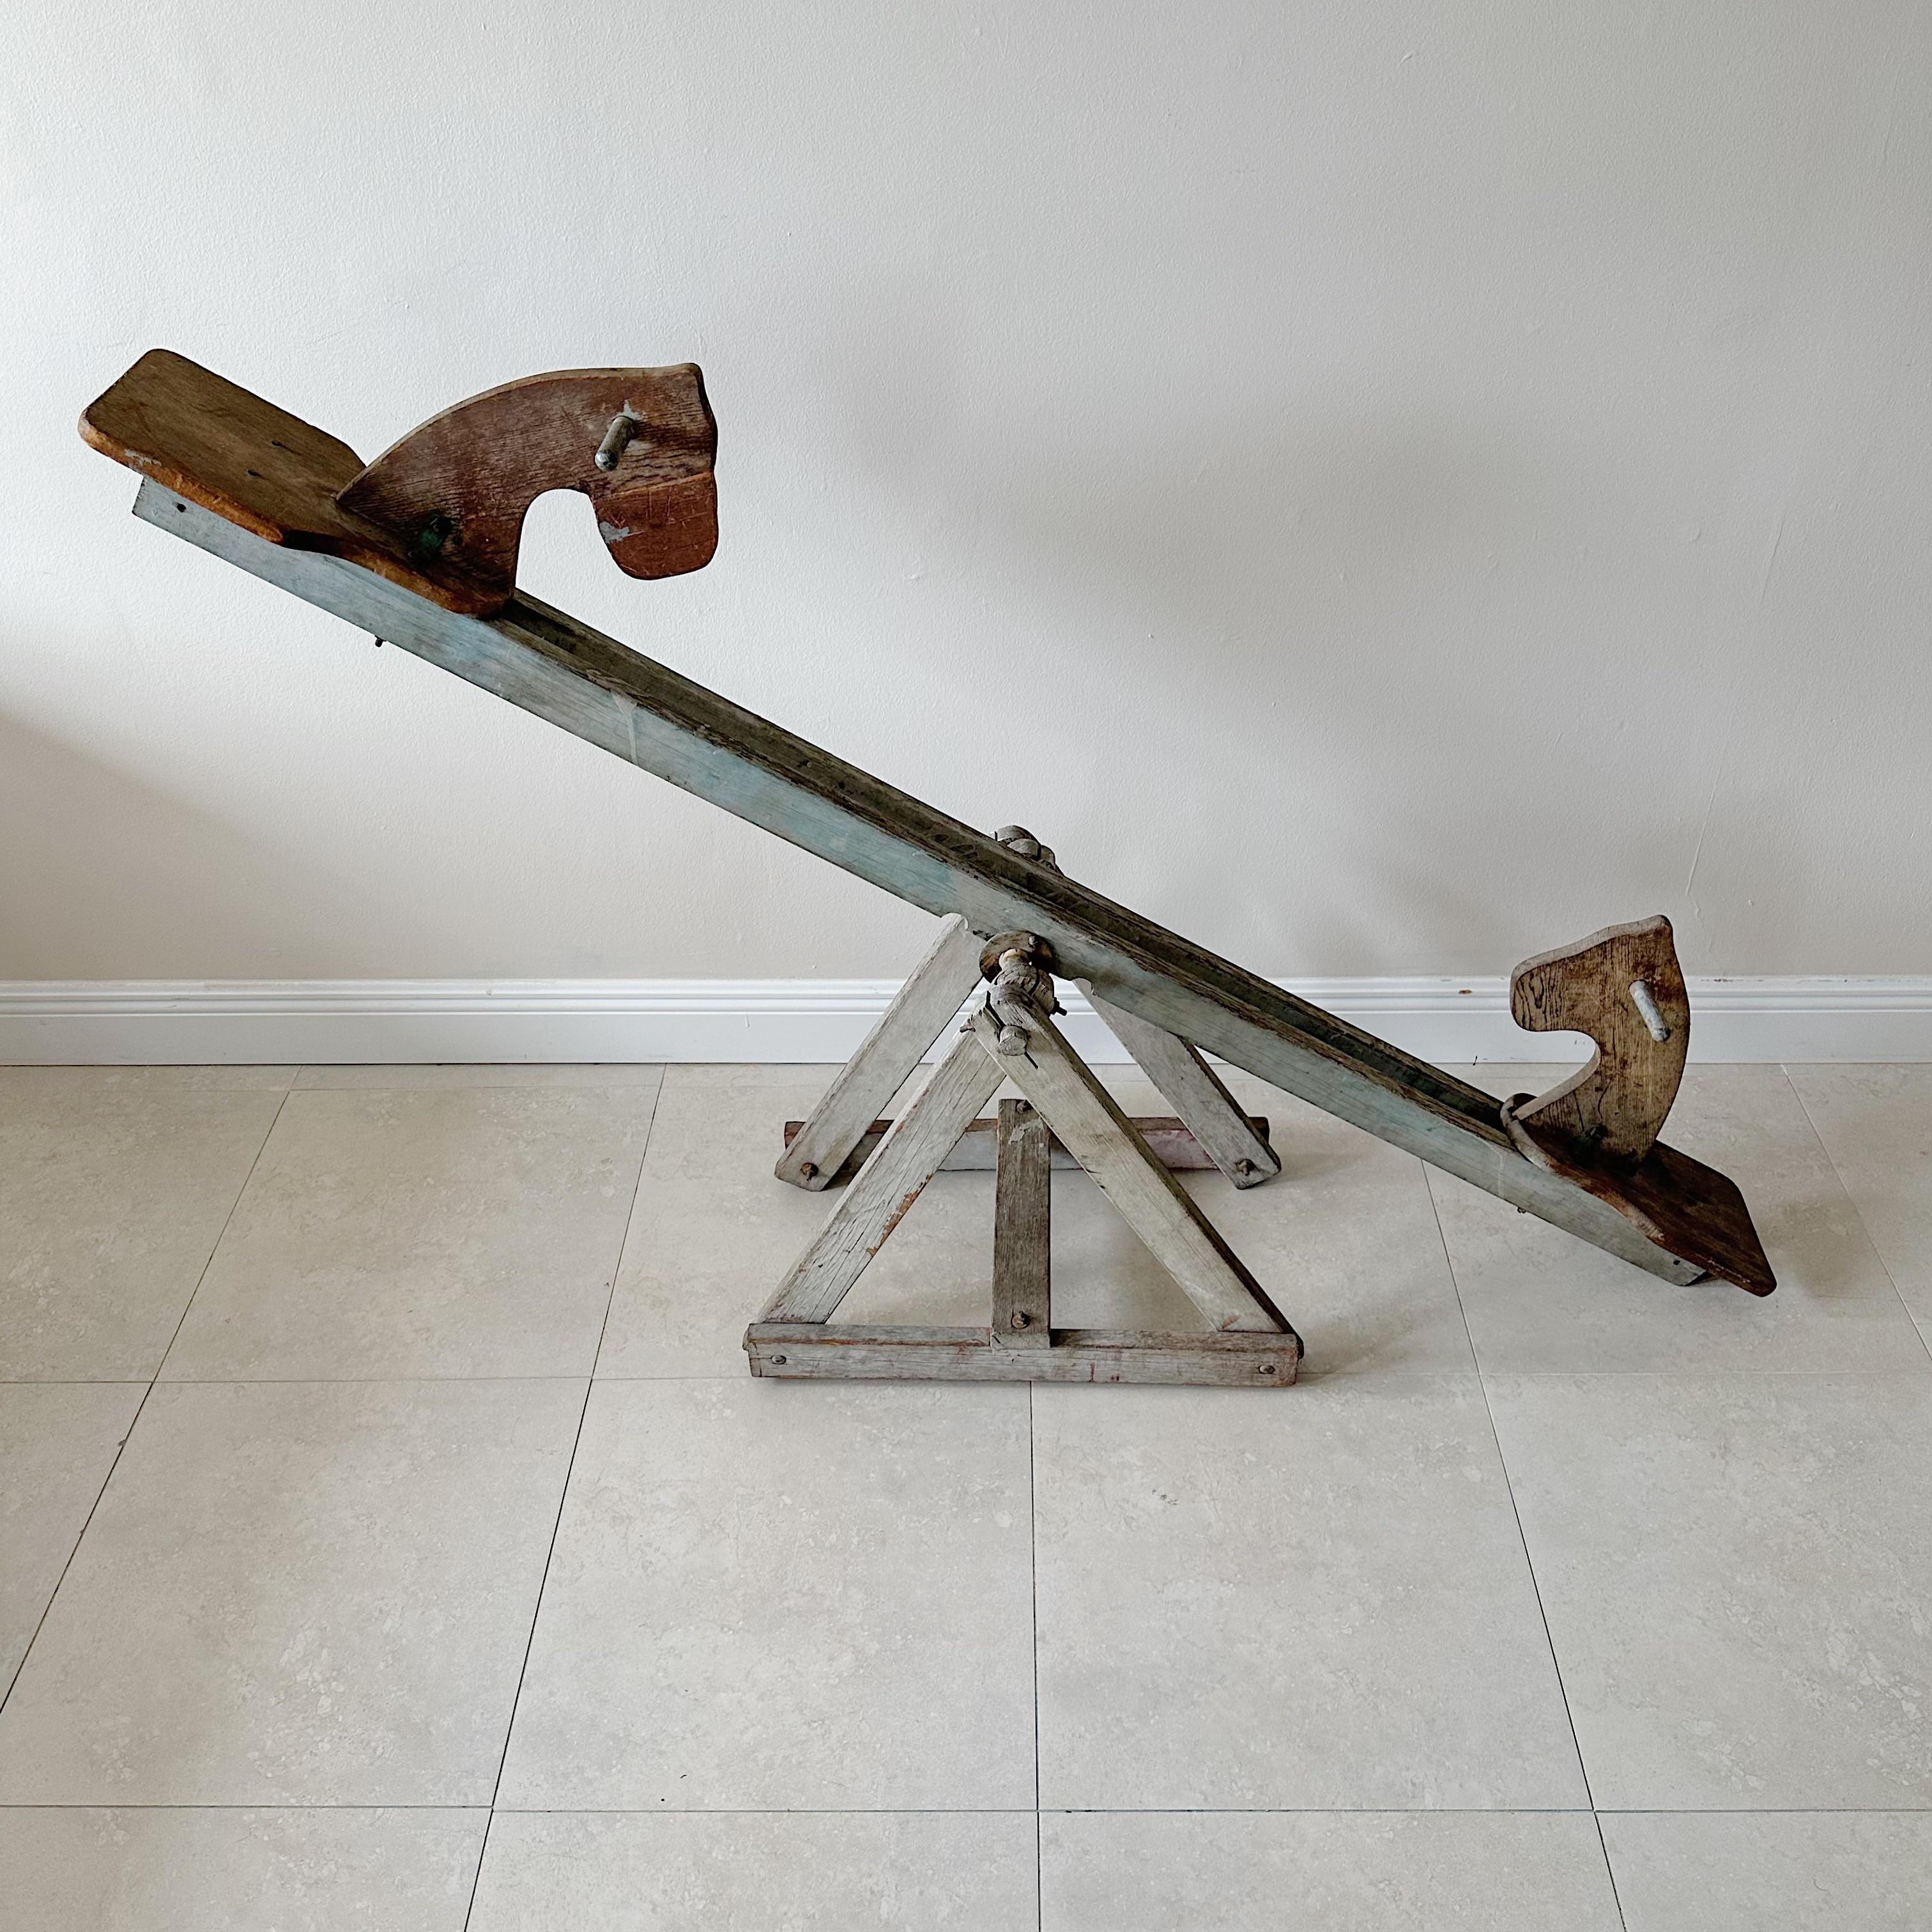 This vintage wooden horsehead see-saw teeter-totter from the 1940s is a unique piece of Americana. The remnants of old gray, red, and blue paint add to its vintage charm, making it a great decorative sculpture for any room. However, due to its age